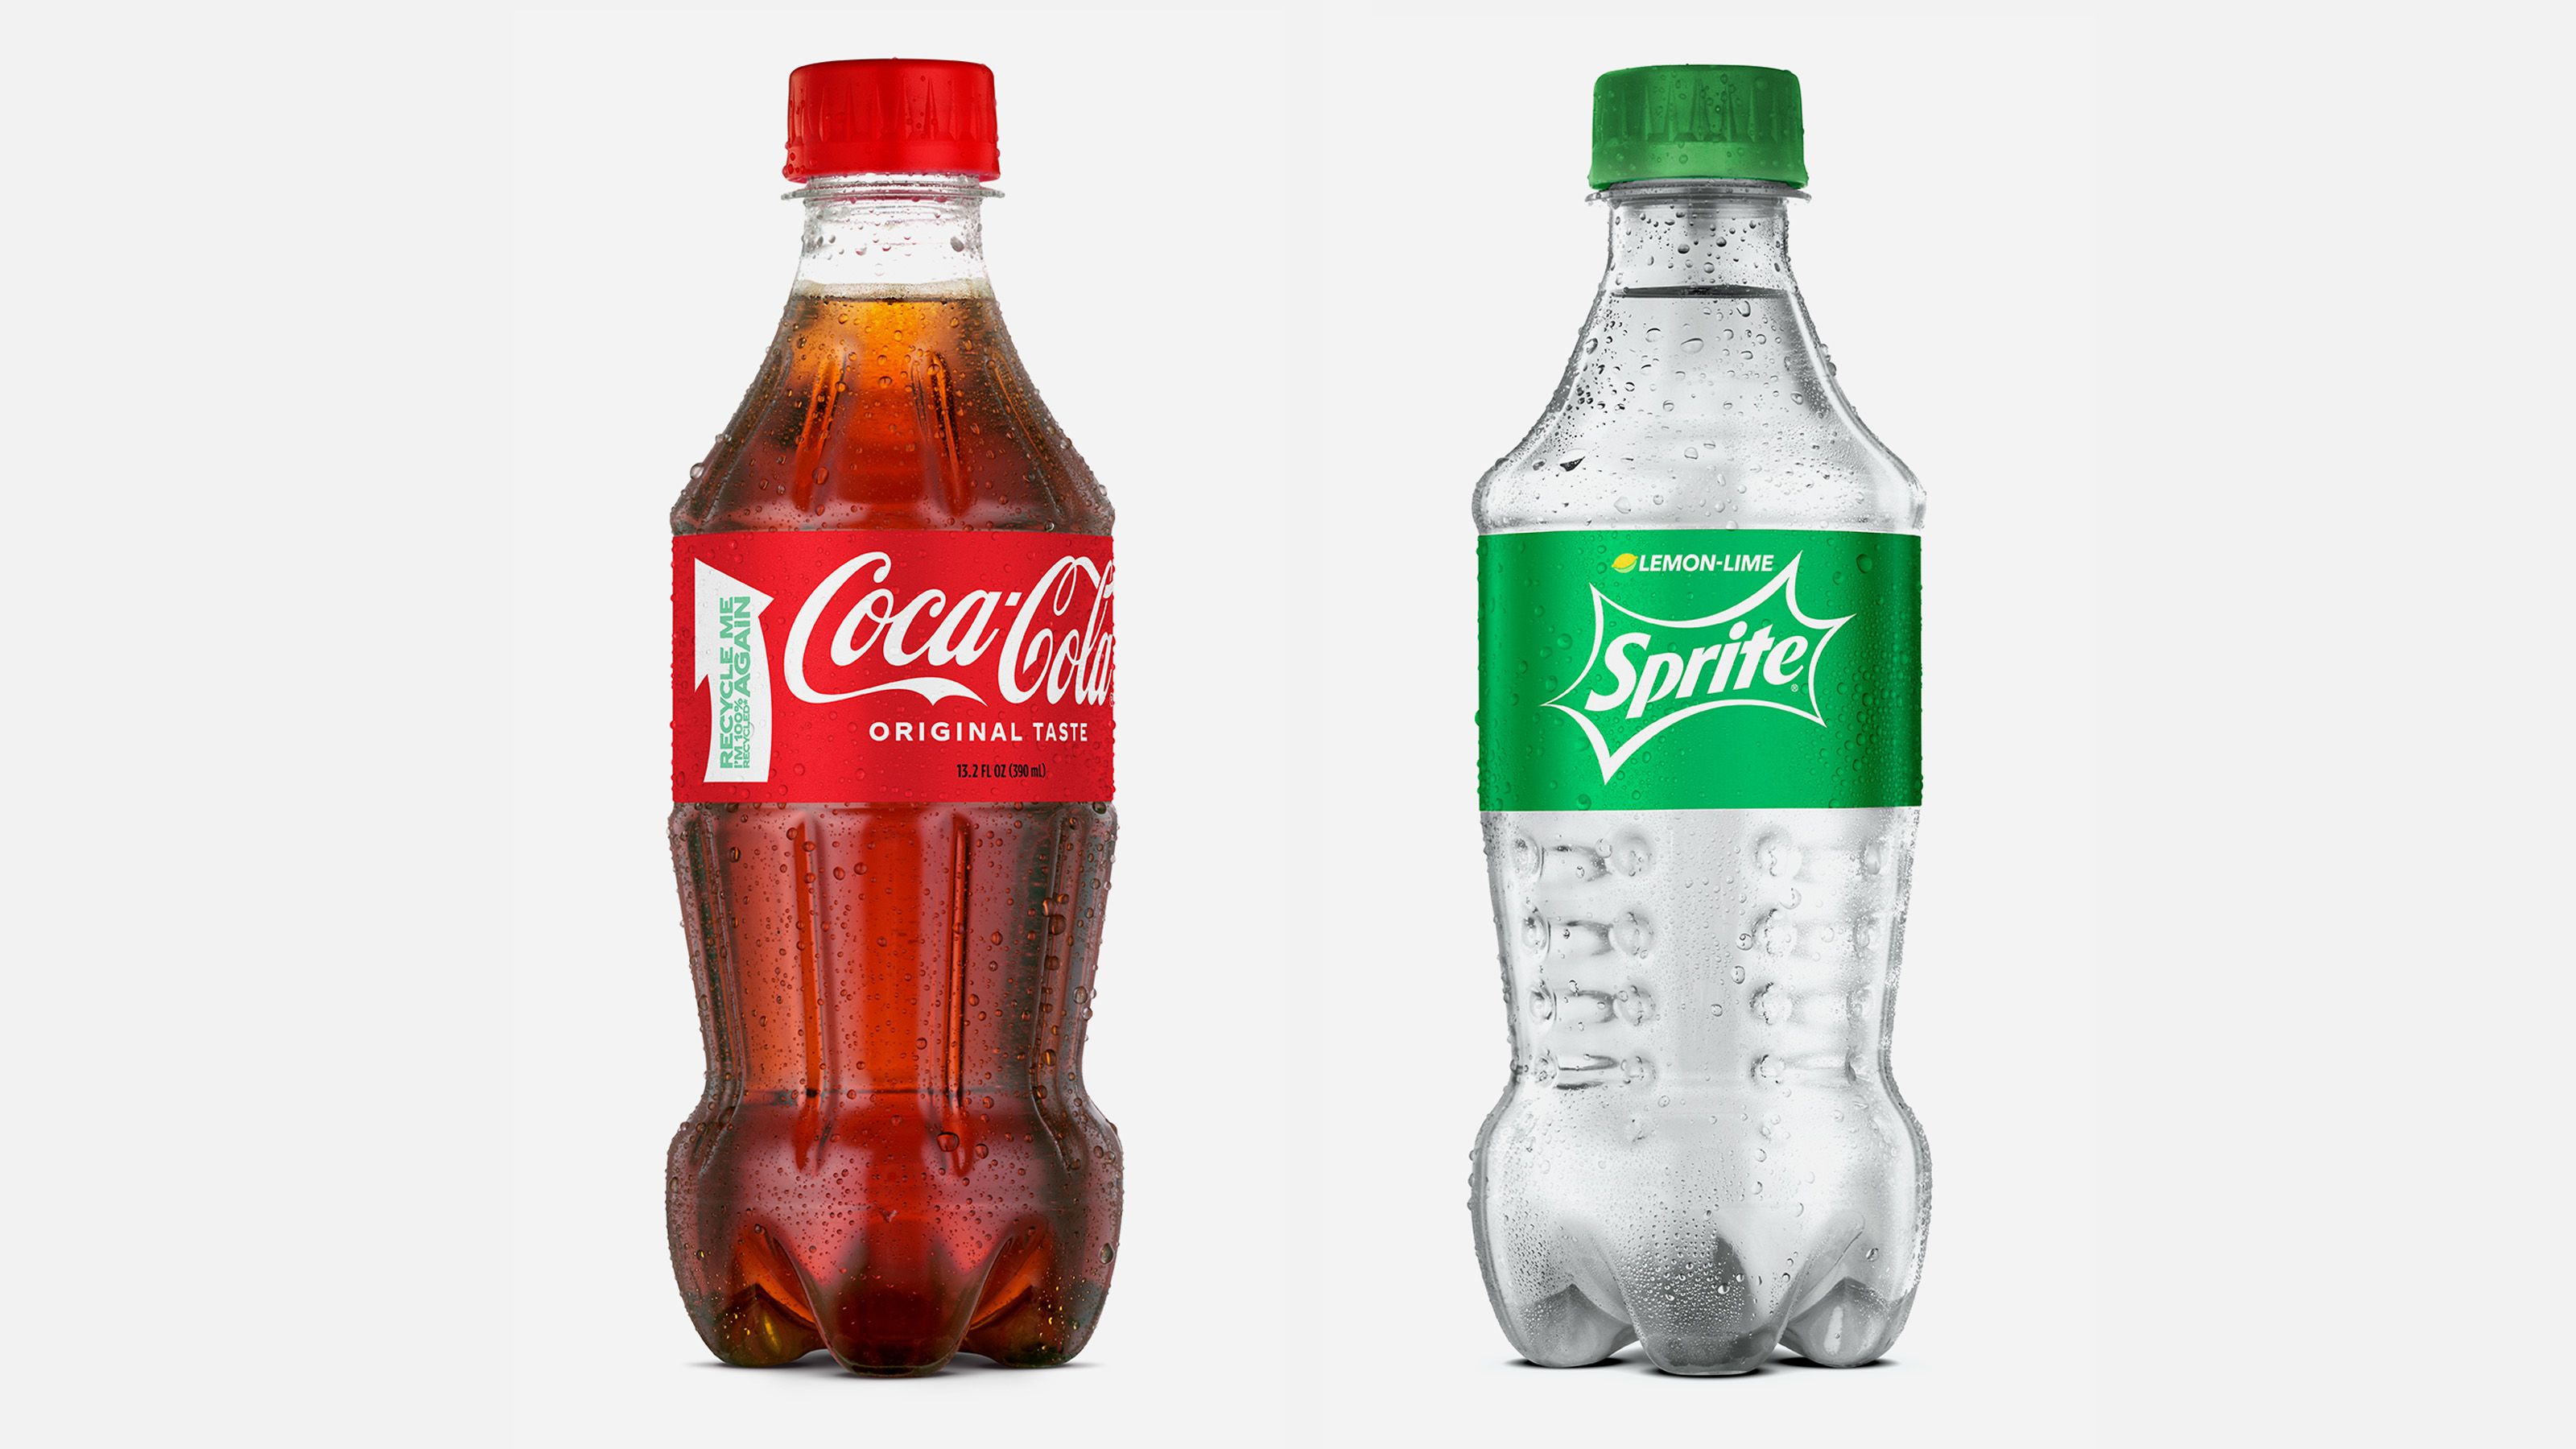 Is Europe about to ban the iconic Coca-Cola bottle? – Euractiv